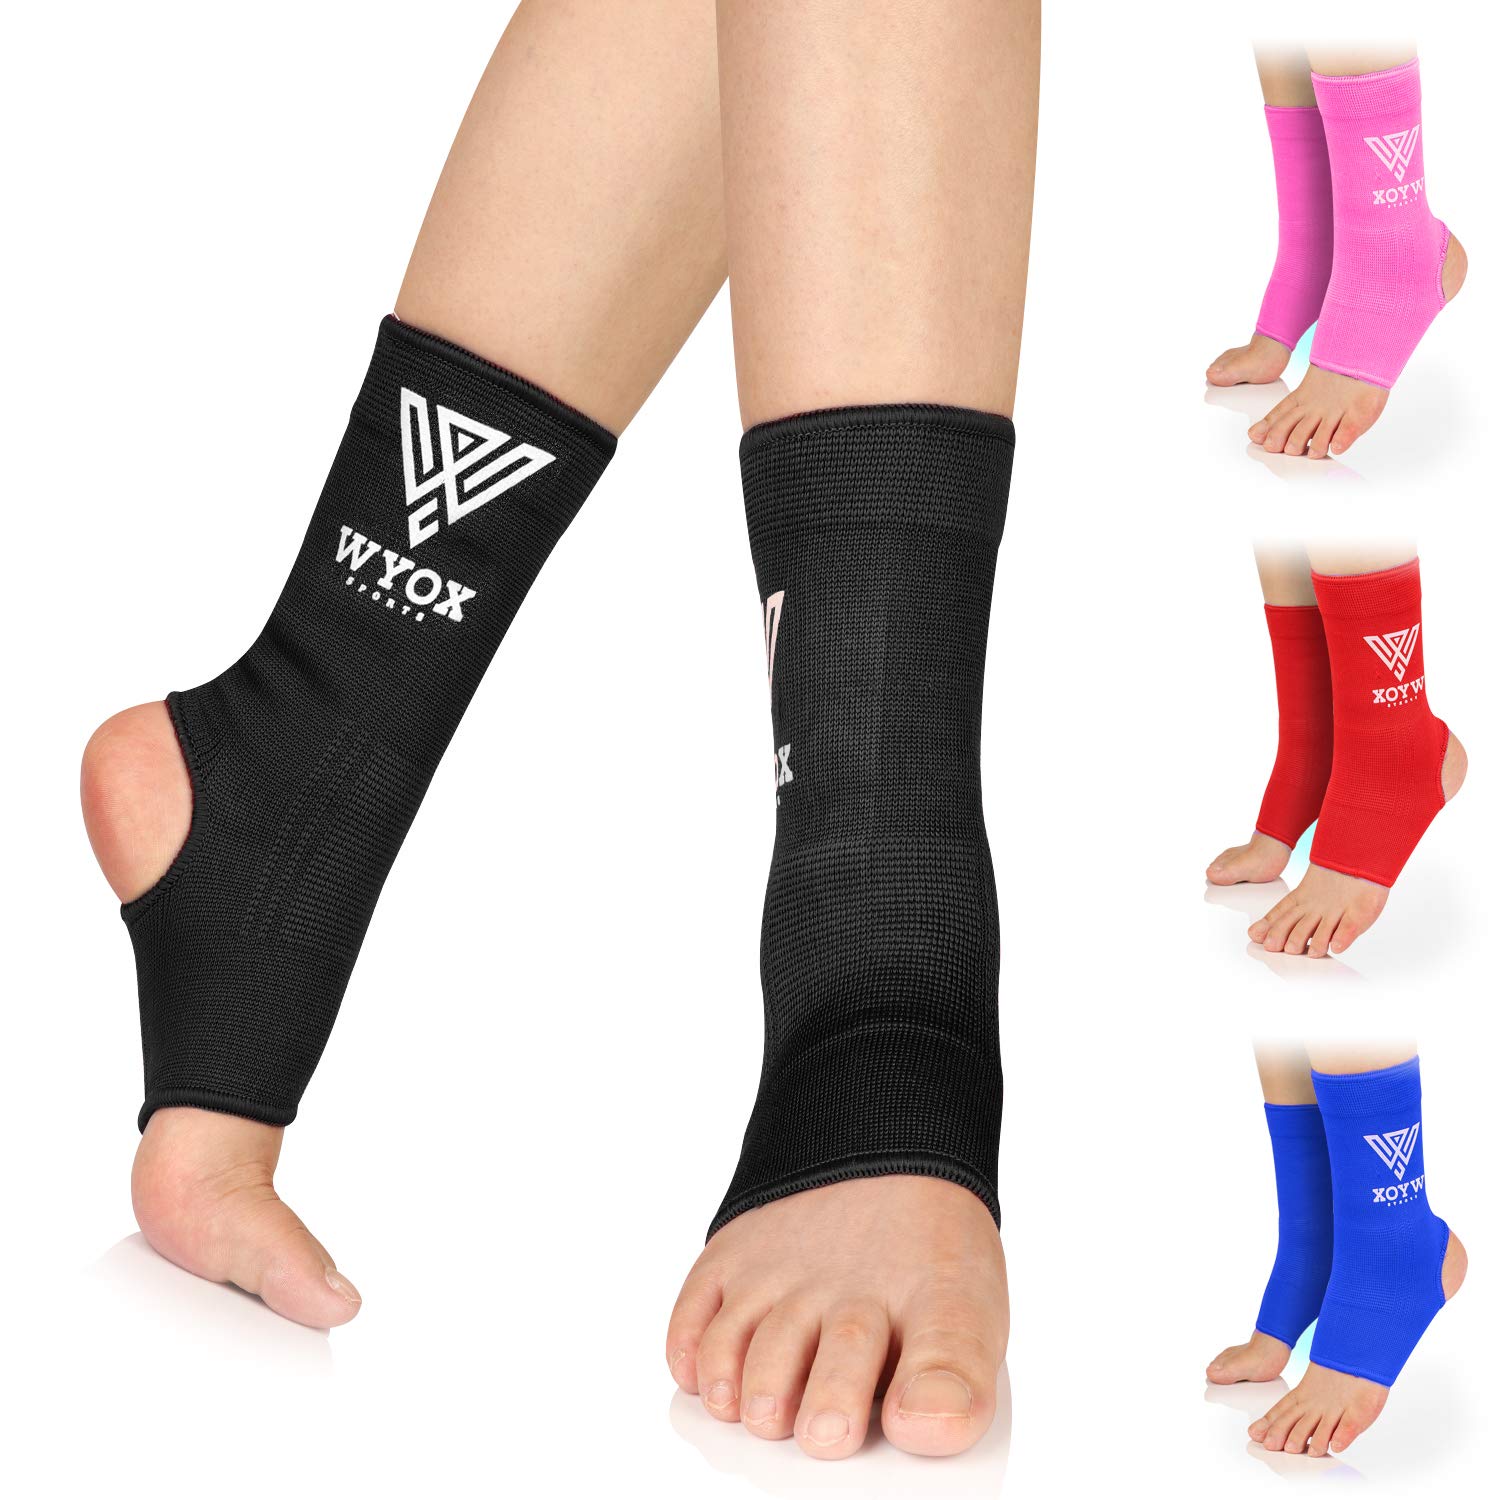 WYOX Ankle Wraps Support Boxing Gear for Men Women Muay Thai Ankle Support  Kickboxing Wraps Gym Ankle Support (Pair) Black L / XL (Women 7.0 - 10.5/  Men 6.0 - 9.5)